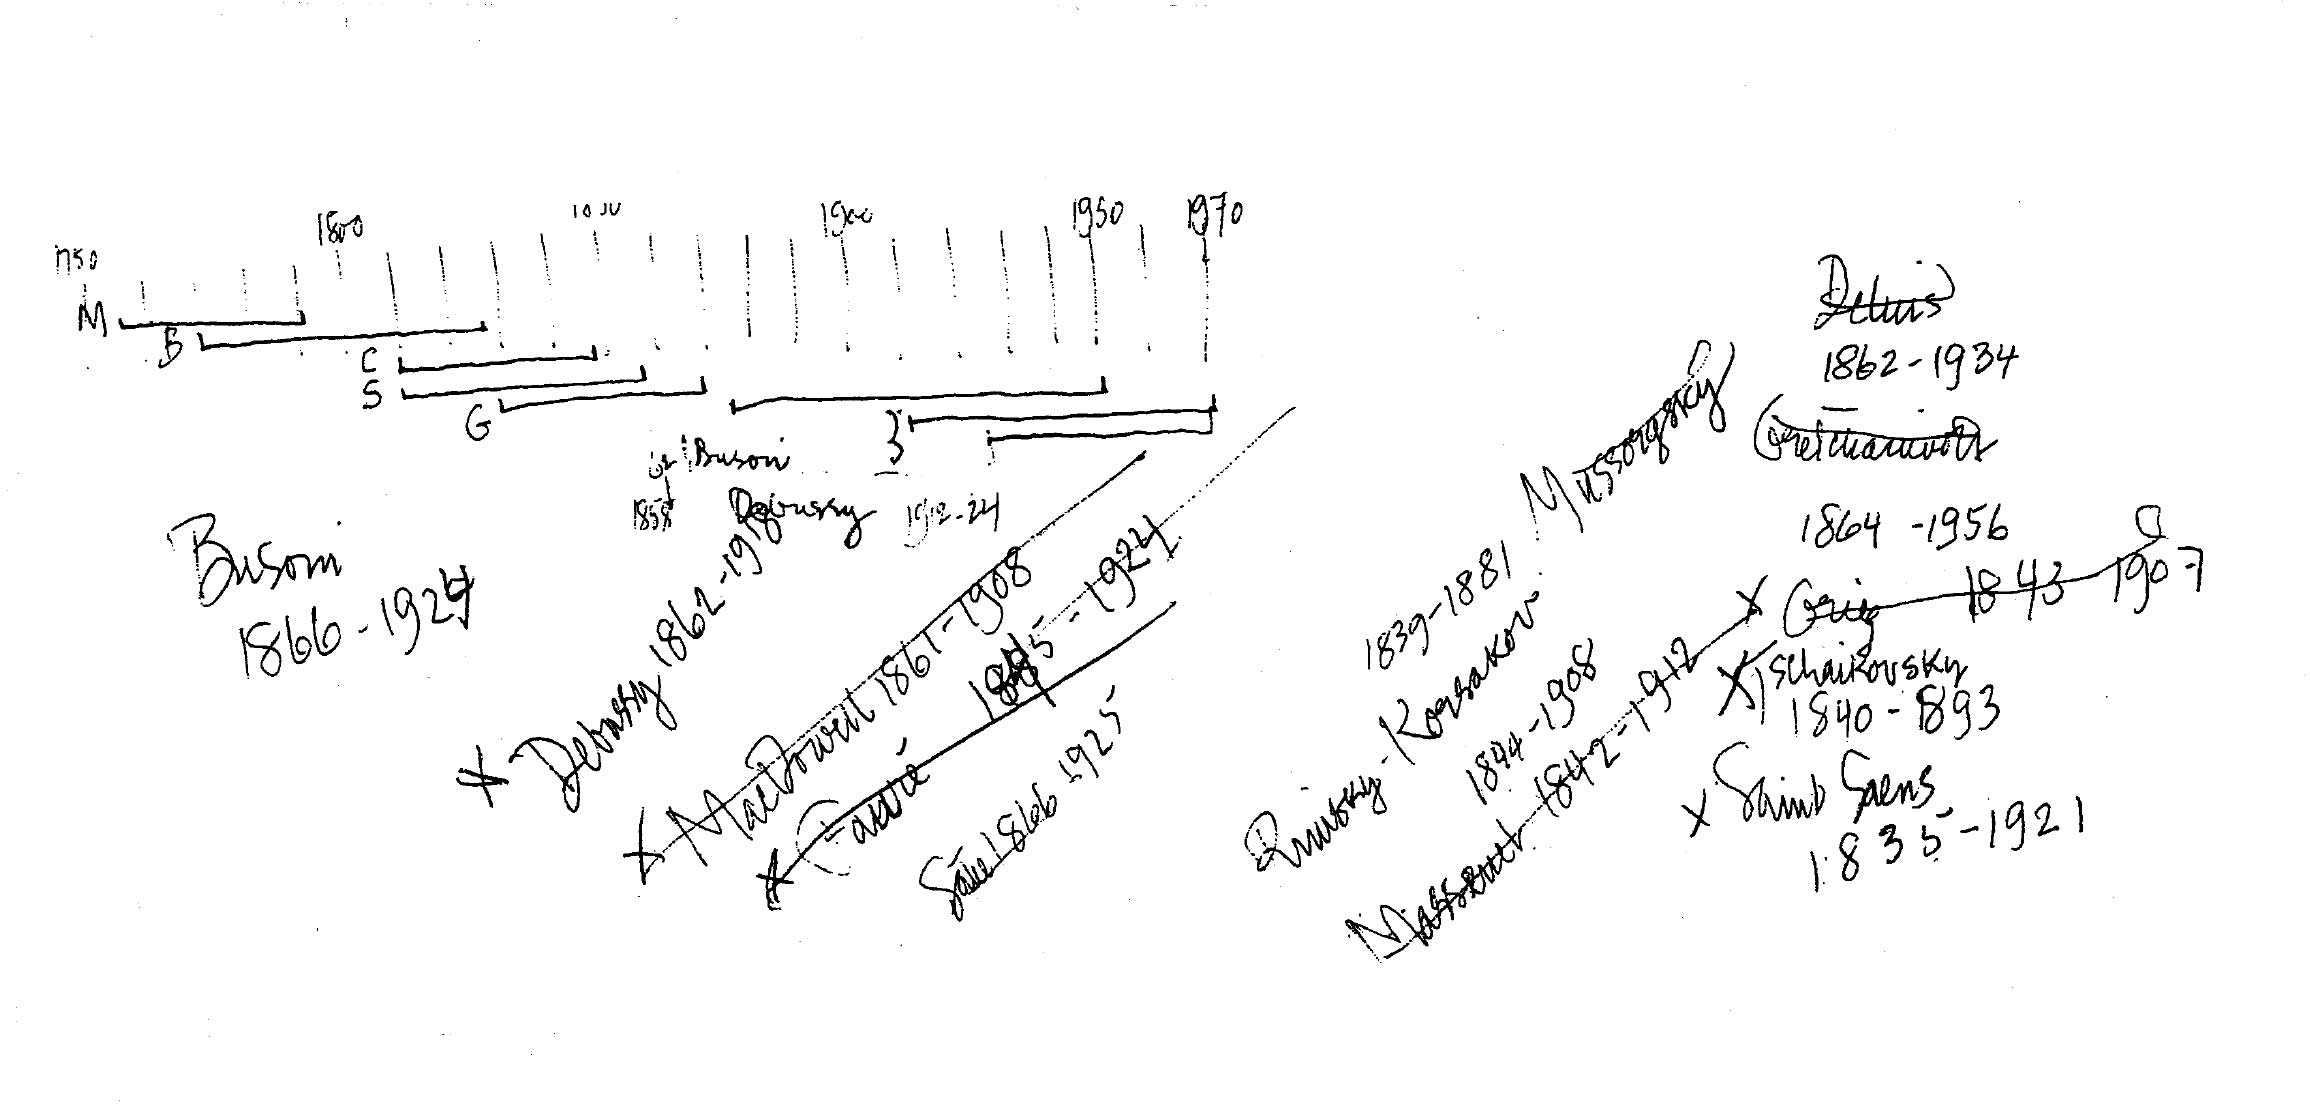 Timeline of composers used in HPSCHD, their birth and death dates, and list of possible replacements for Ives. Manuscript from the John Cage Collection, New York Public Library, New York, New York.